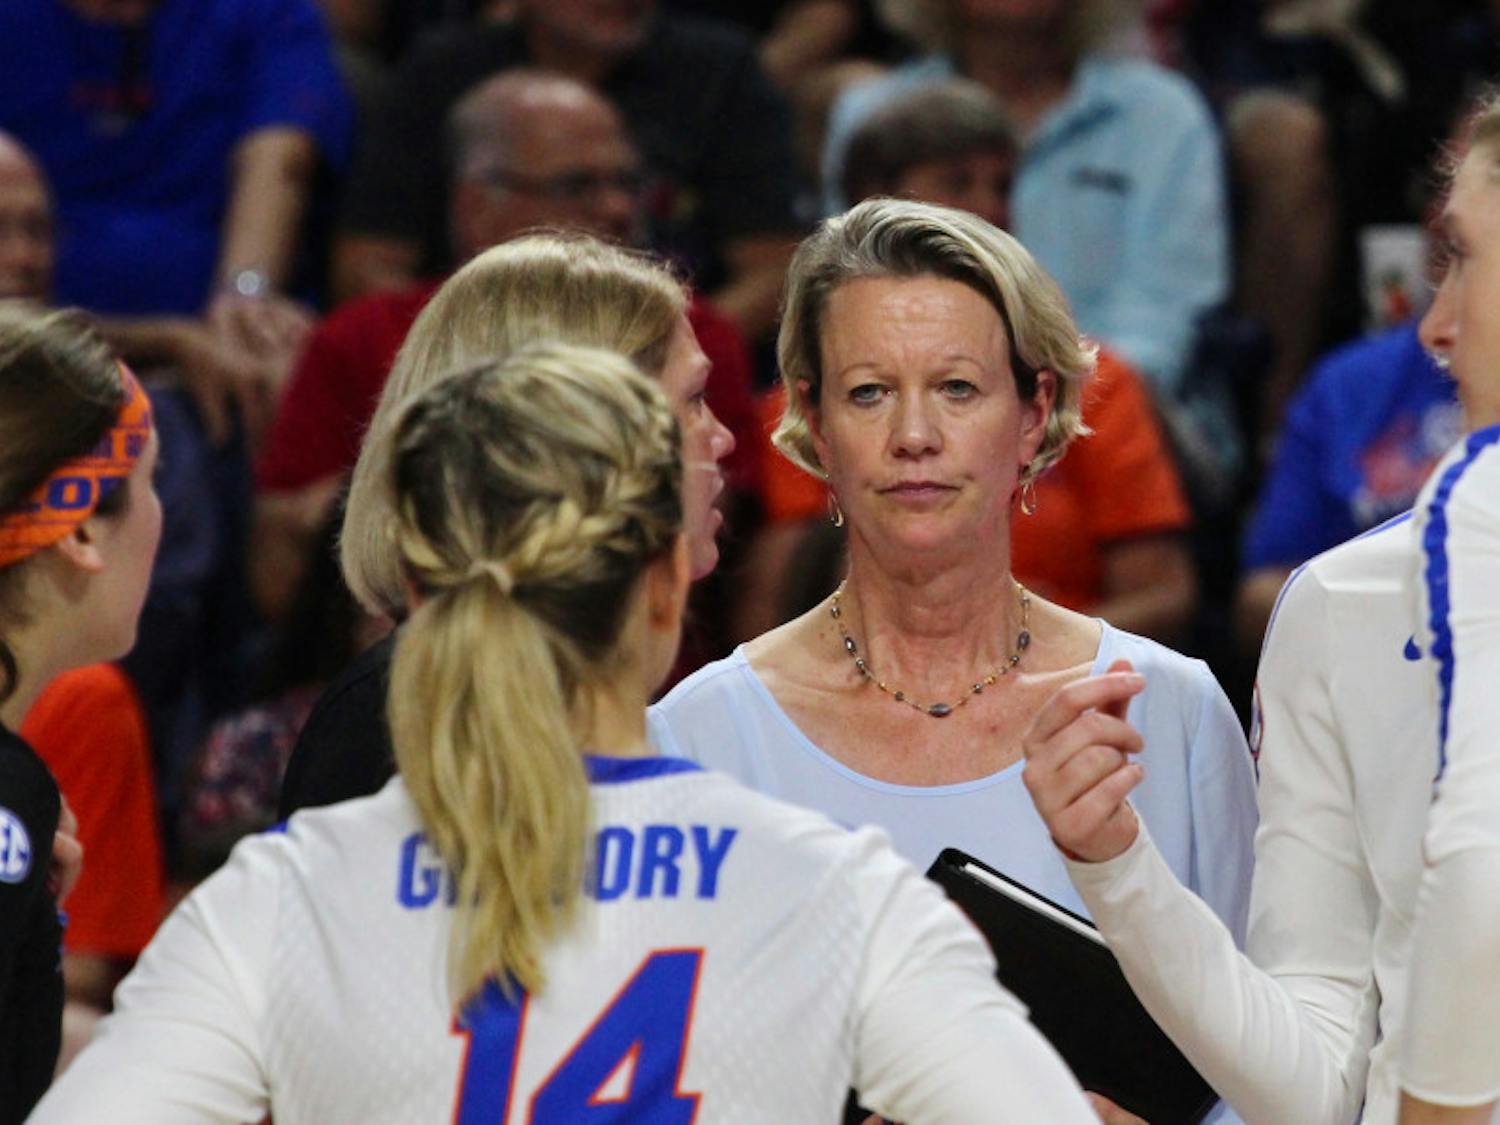 After losing to No. 5 Kentucky, the Gators will travel to Alabama to play the Crimson Tide and Auburn. “We played the best in the country, or will be, or is one of the best,” coach Mary Wise said of Kentucky following the loss.